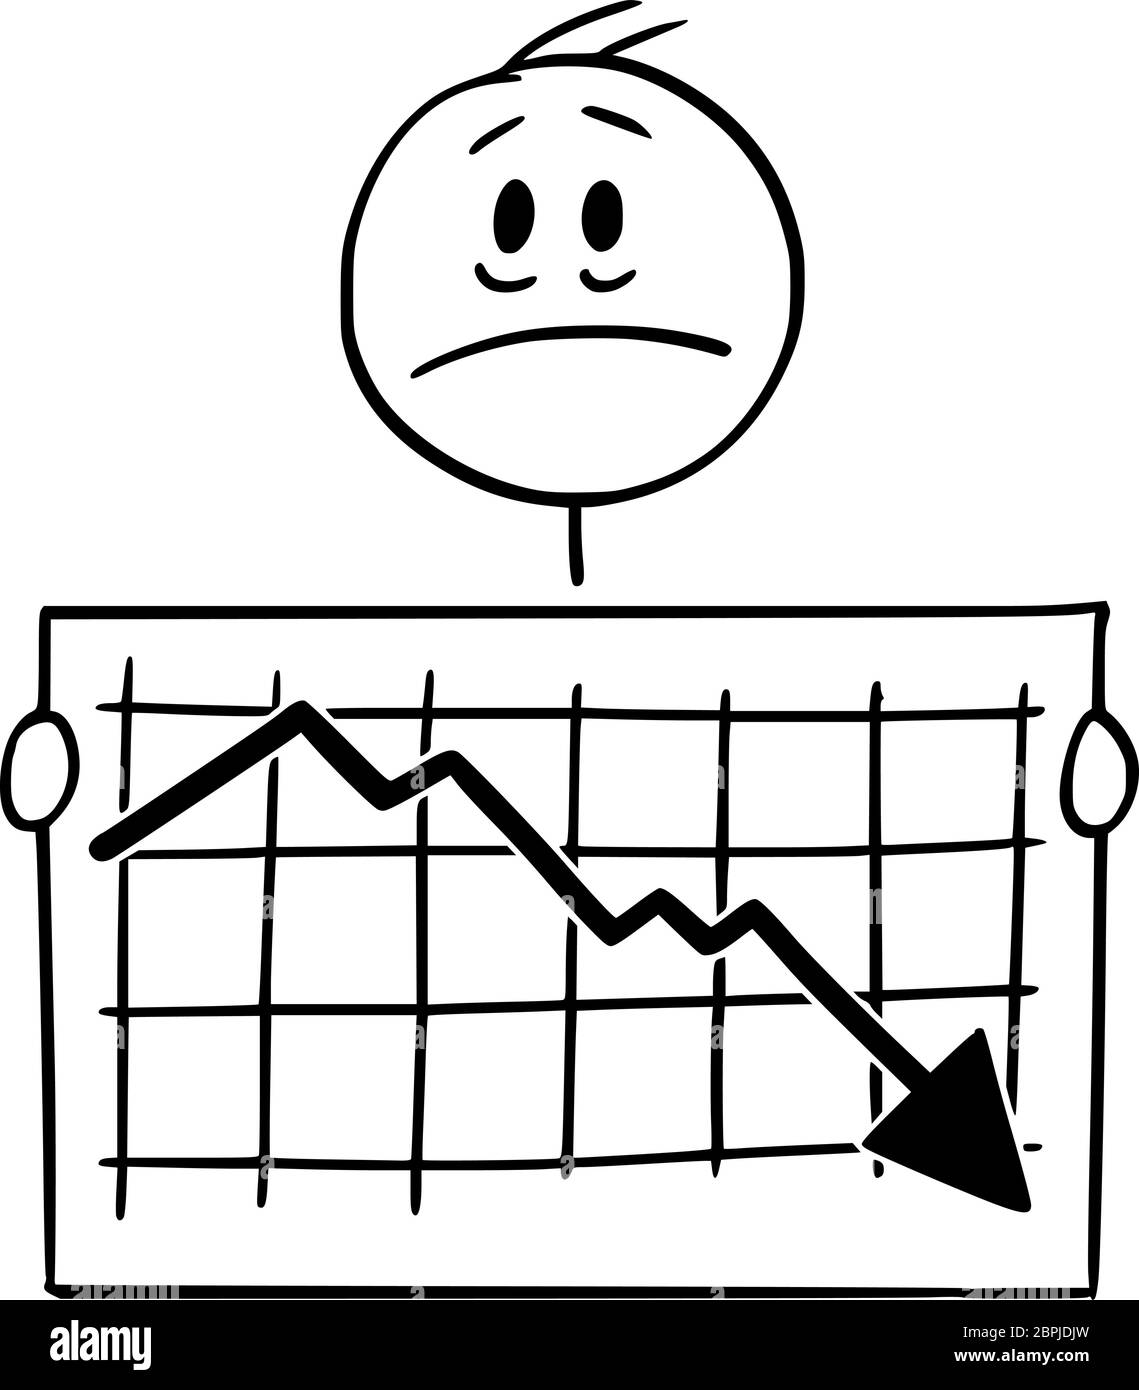 Vector cartoon stick figure drawing conceptual illustration of unhappy man or businessman holding falling financial chart or graph. Stock Vector